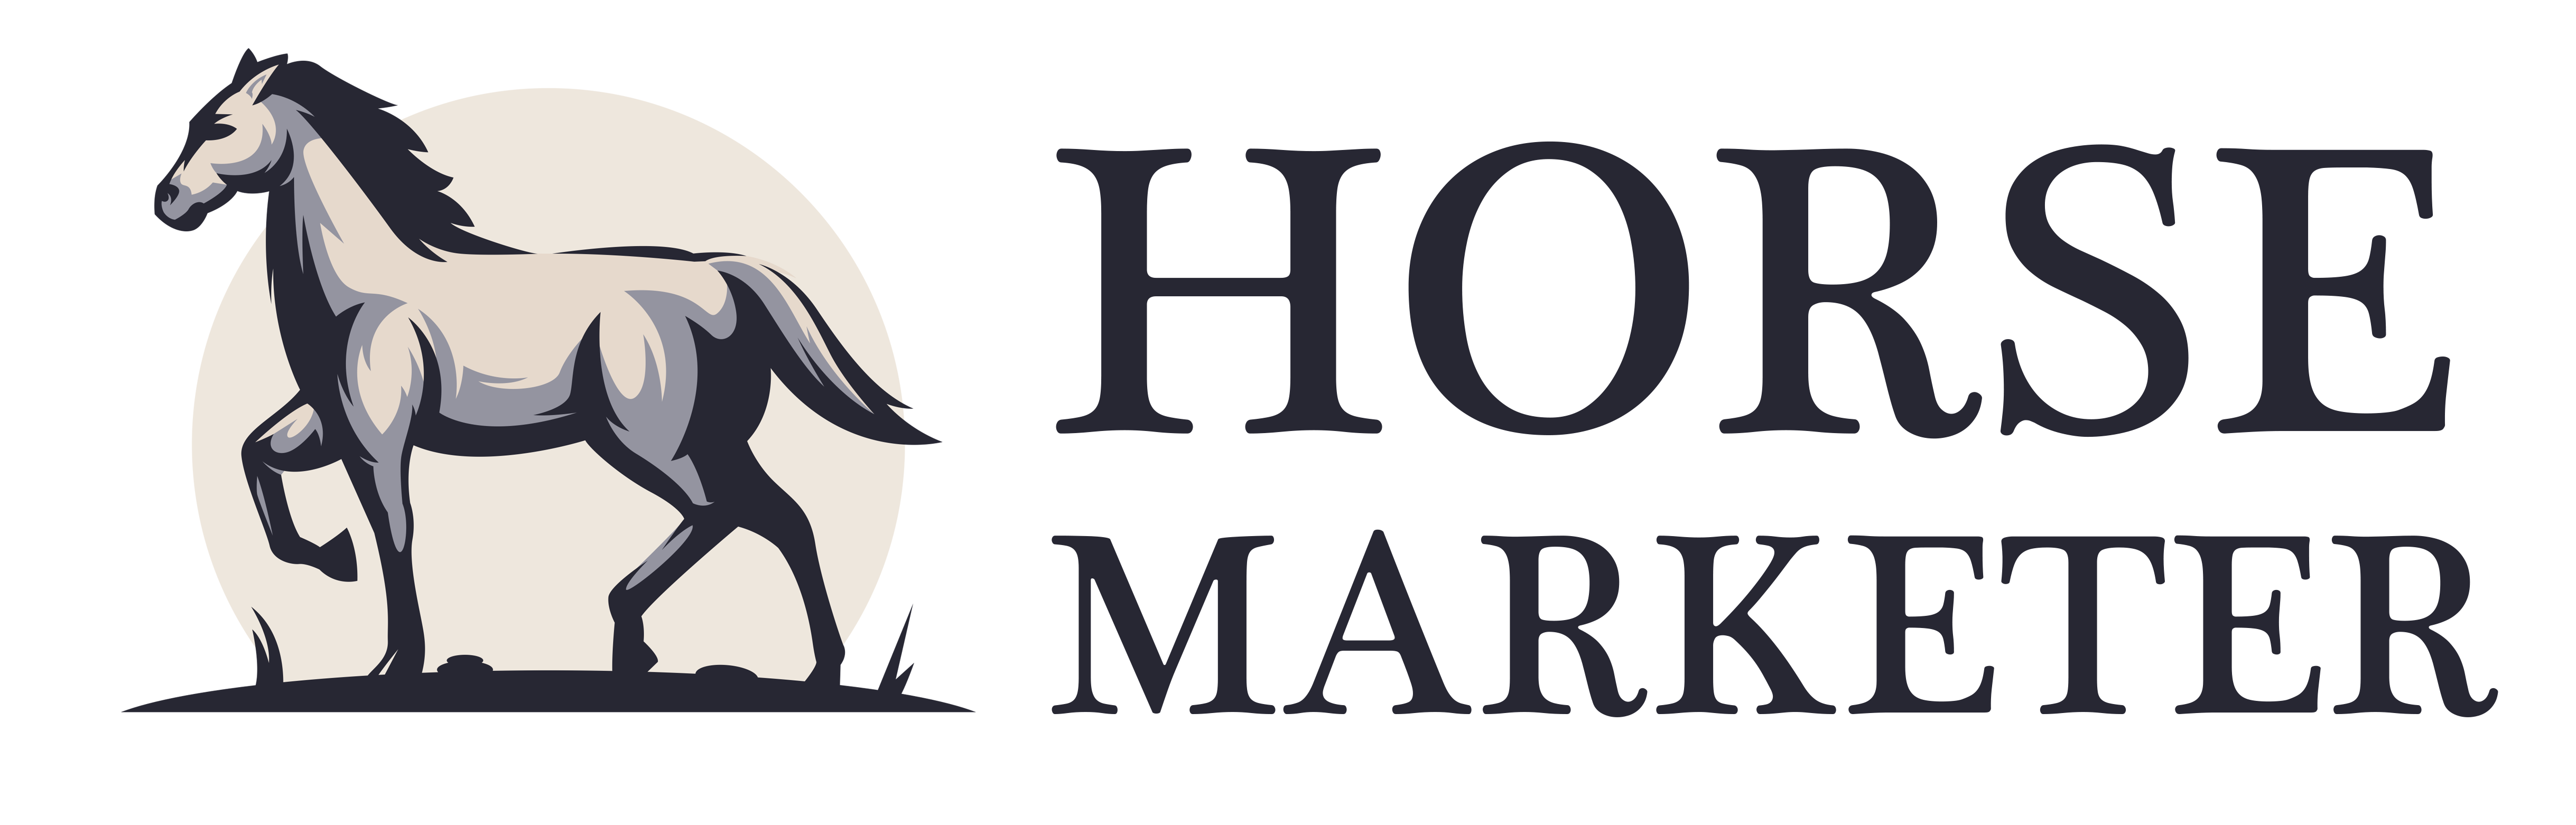 Horse Marketer - Buying and Selling Horses